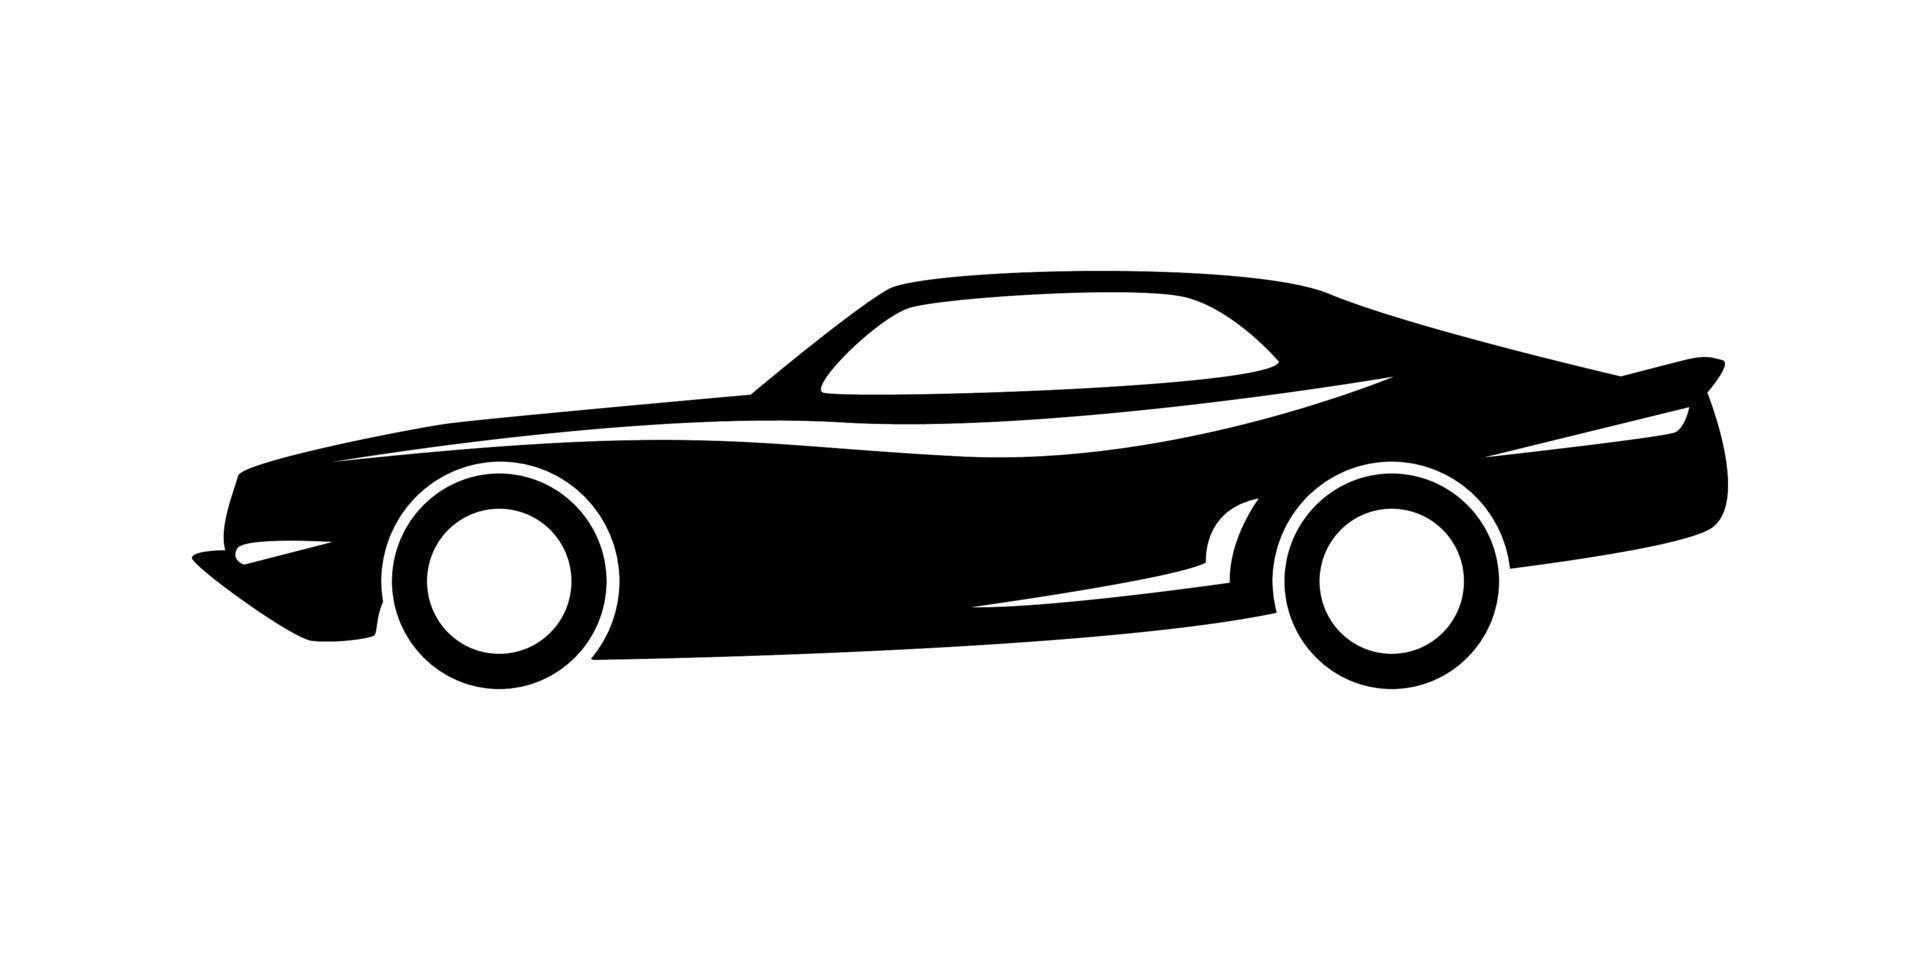 side view car silhouette icon. vector